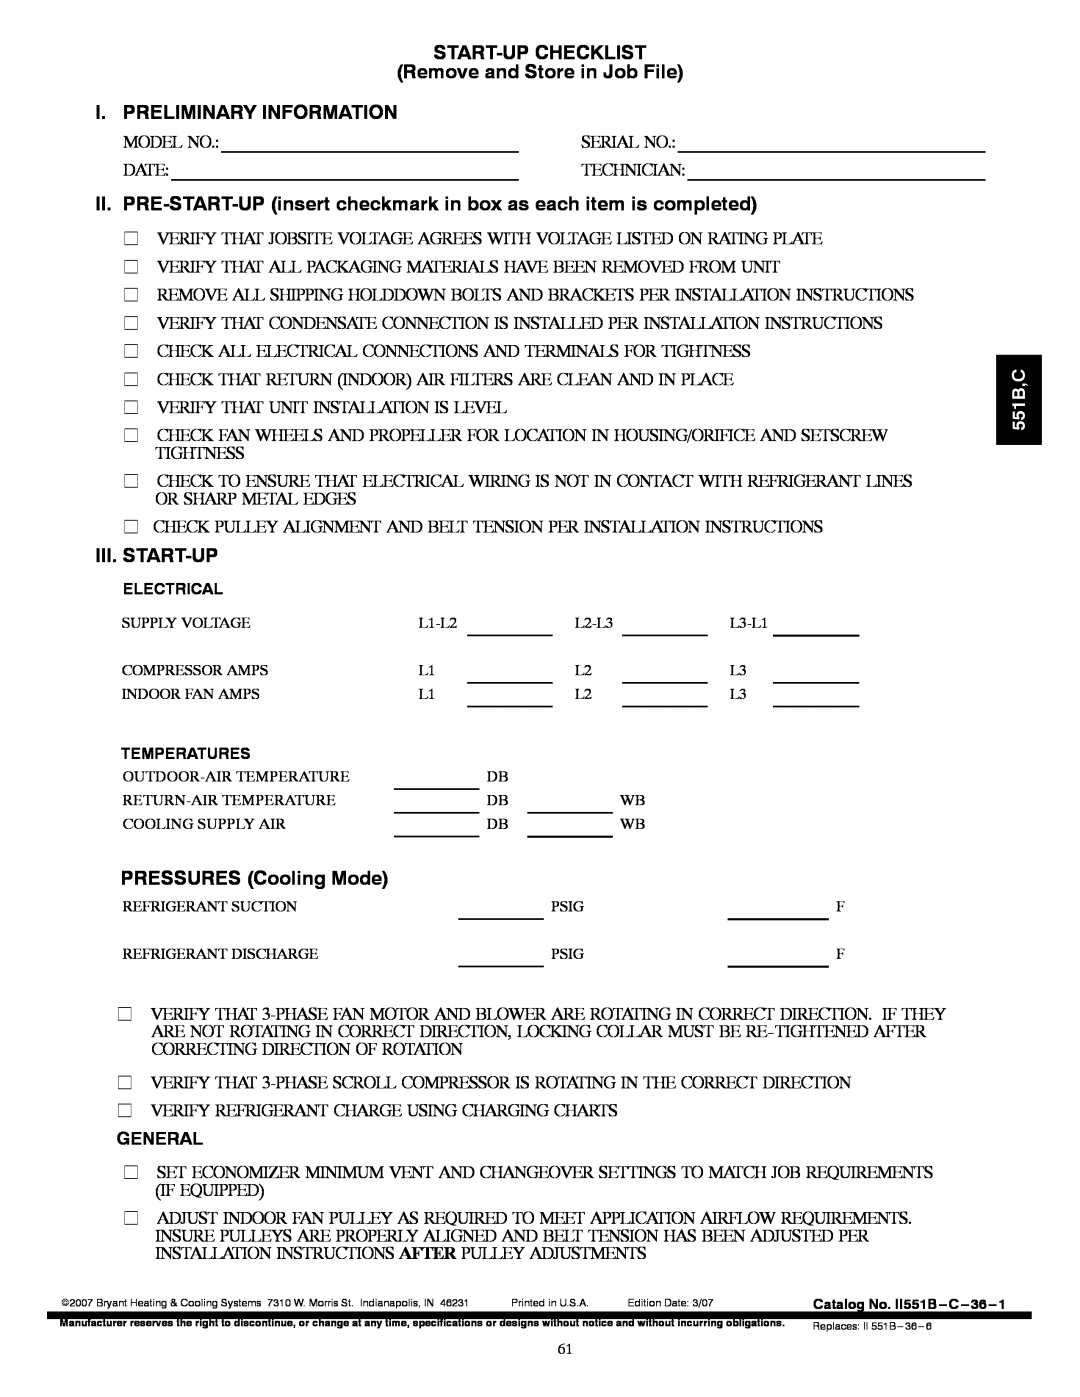 Bryant 551C General, START-UPCHECKLIST Remove and Store in Job File, I. Preliminary Information, Iii. Start-Up, 551B,C 